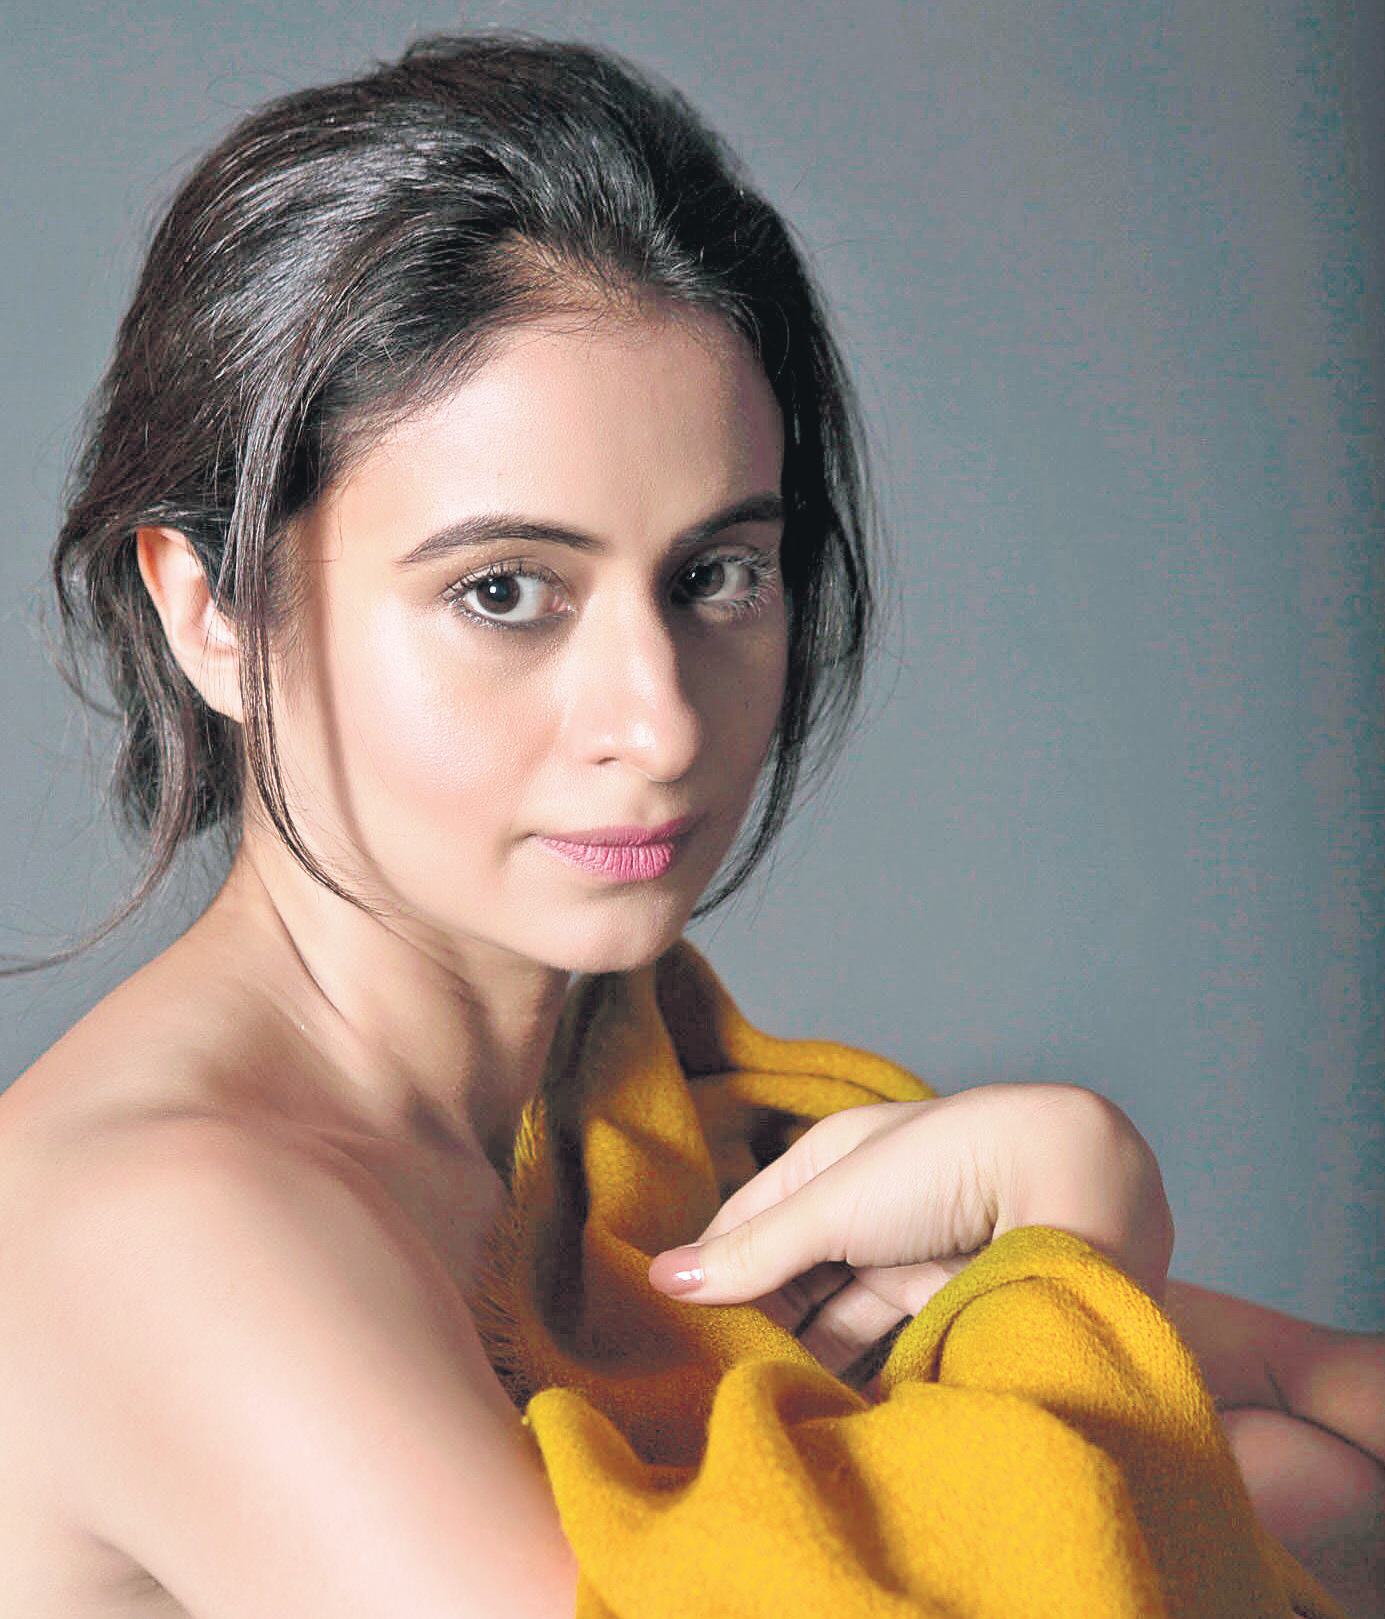 Manto was not the womaniser I thought he was: Rasika Dugal- The New Indian Express